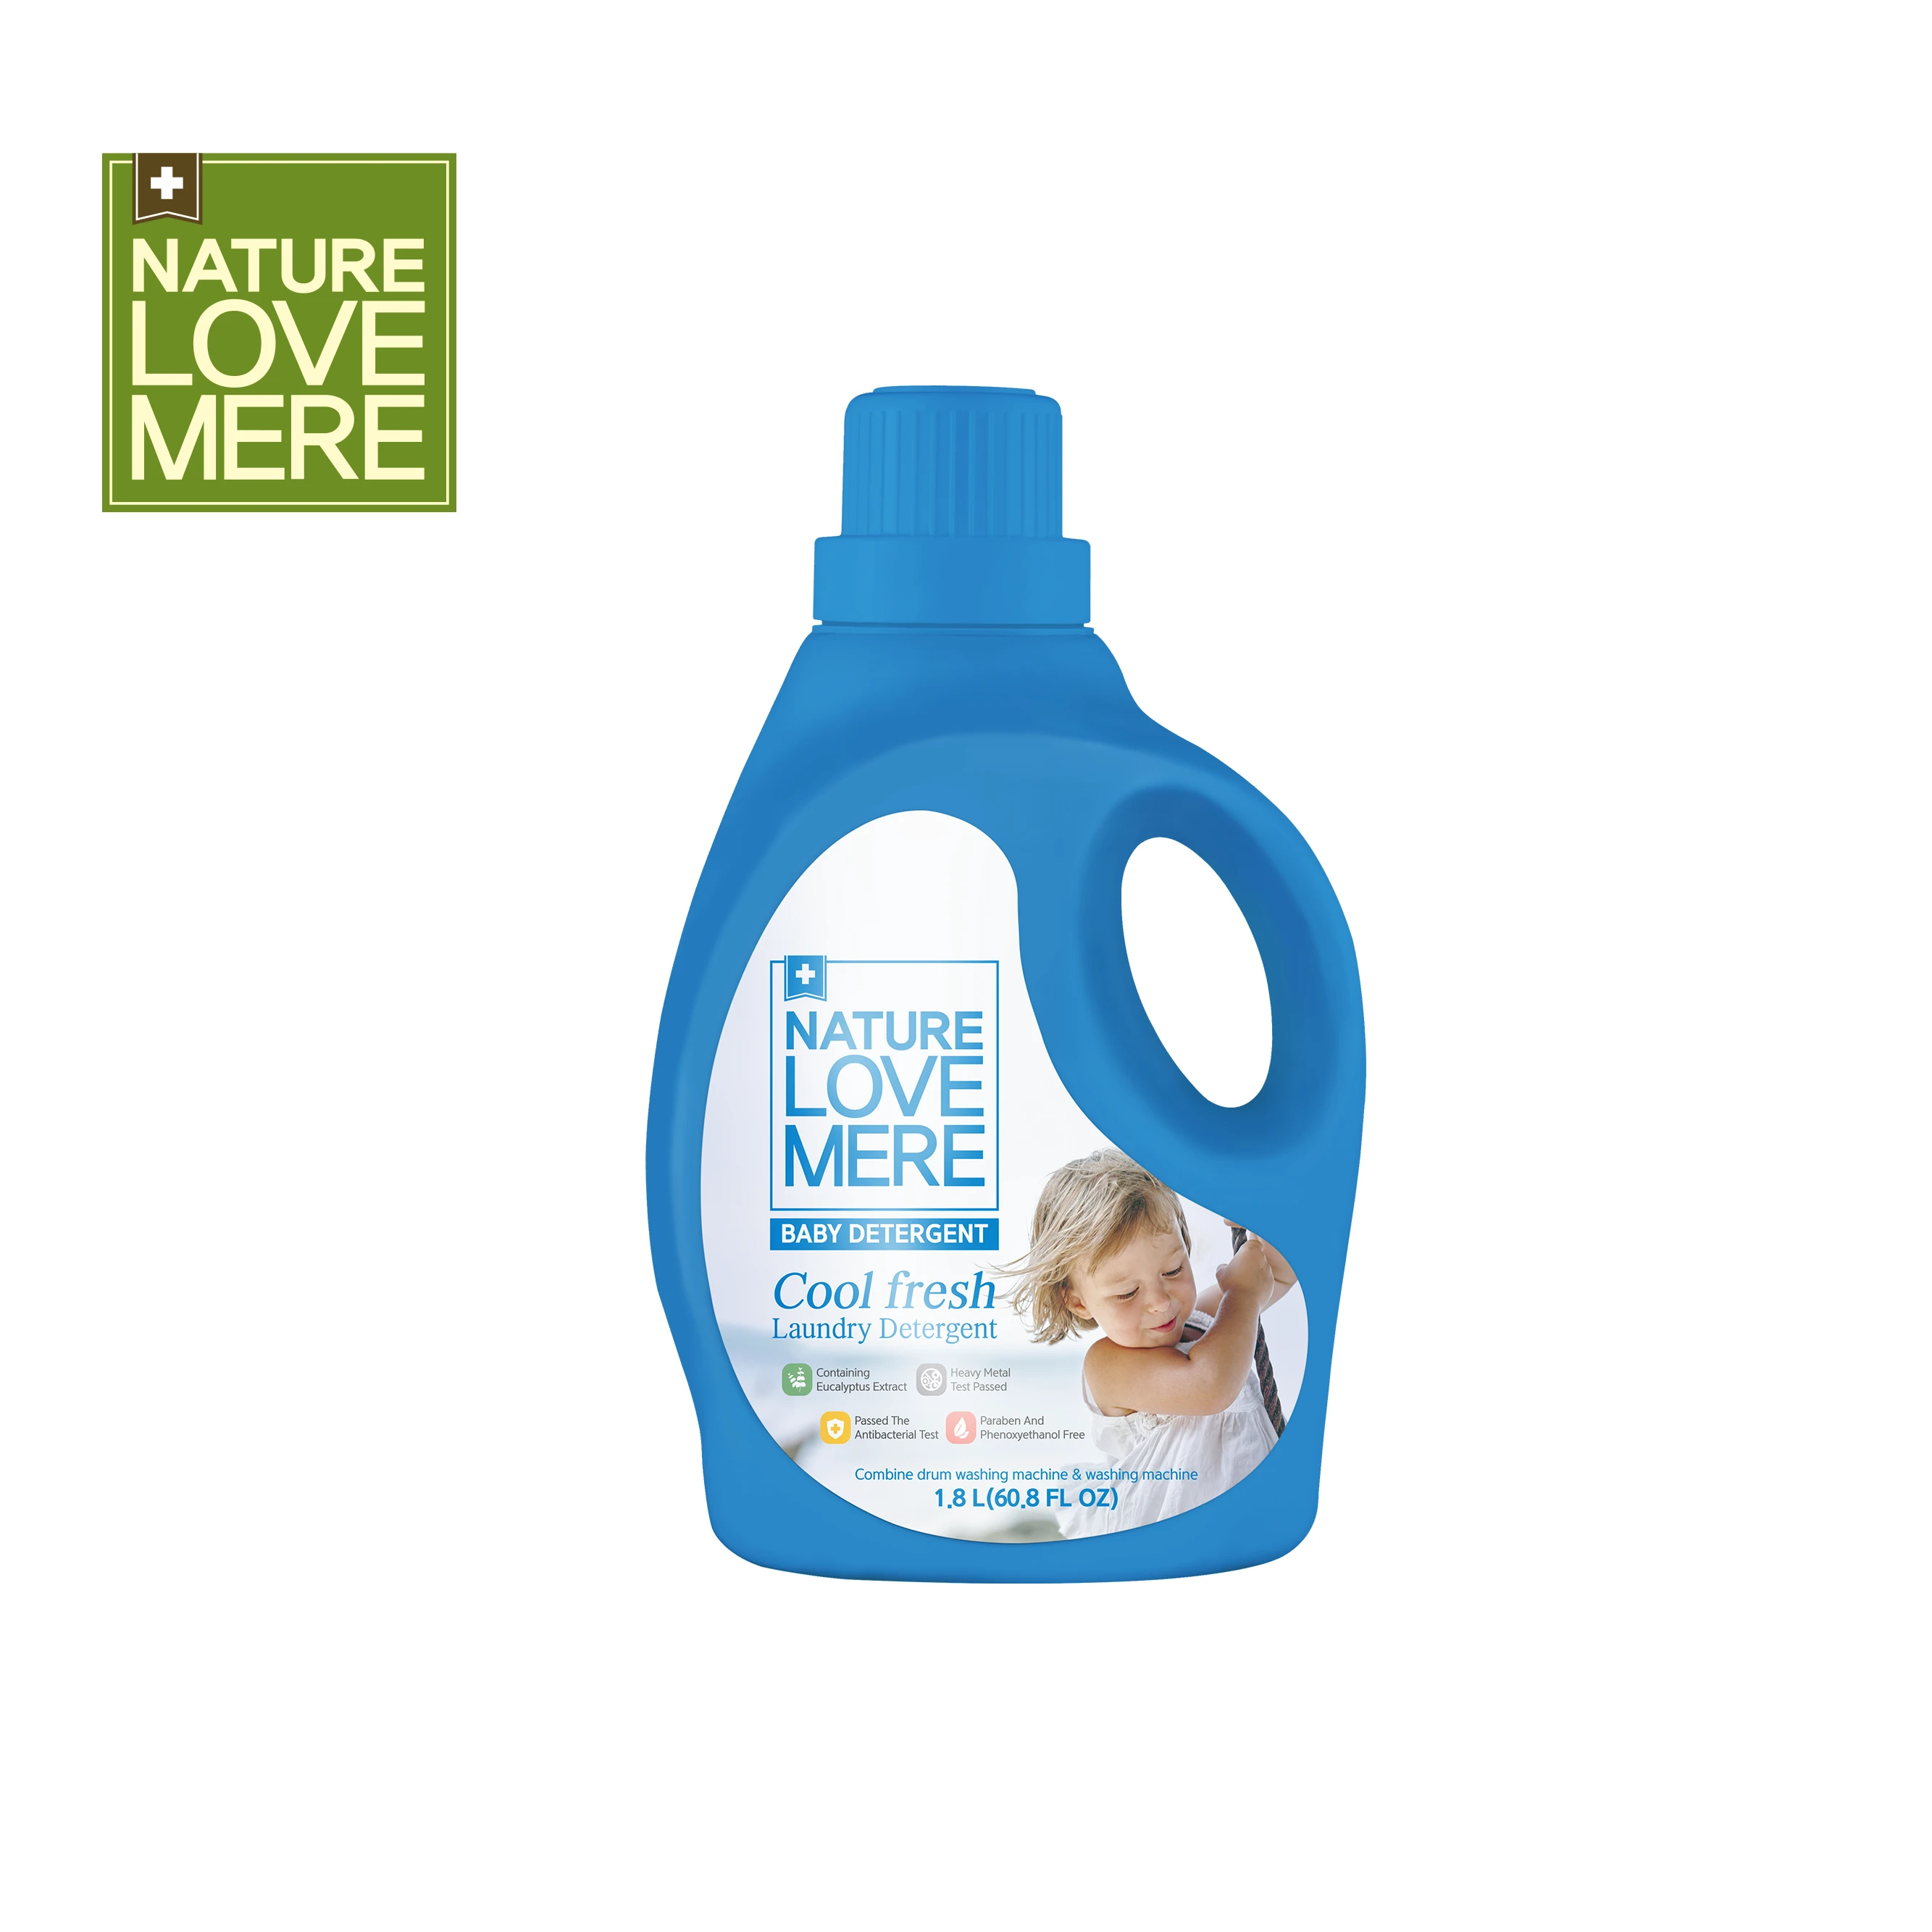 NATURE LOVE MERE Cool Fresh baby laundry detergent refill &amp; container type (1,300ml &amp; 1,800ml)